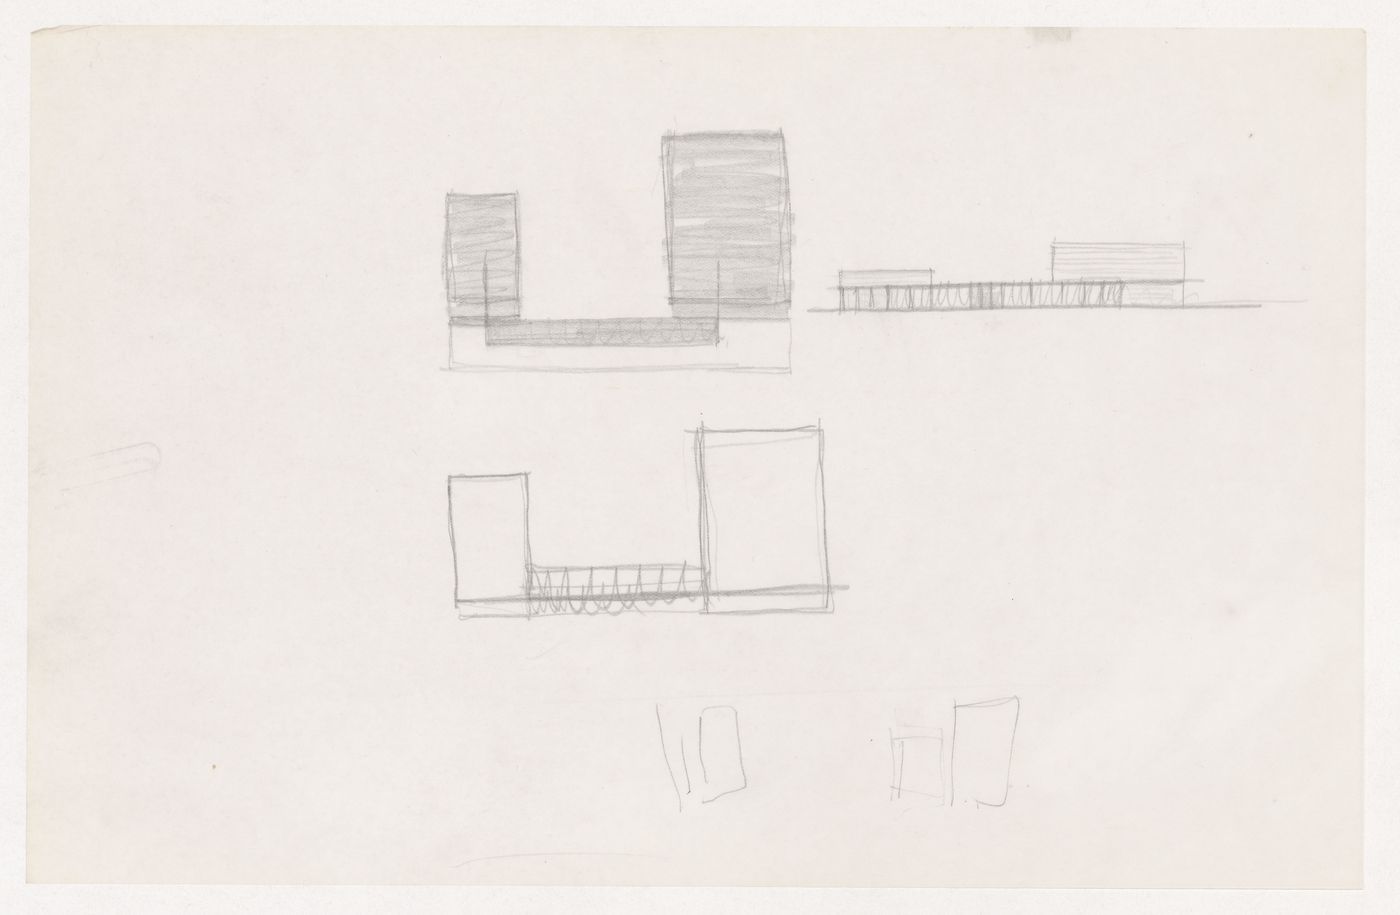 Sketch plans and sketch elevation for the Field House, Gymnasium and Natatorium complex